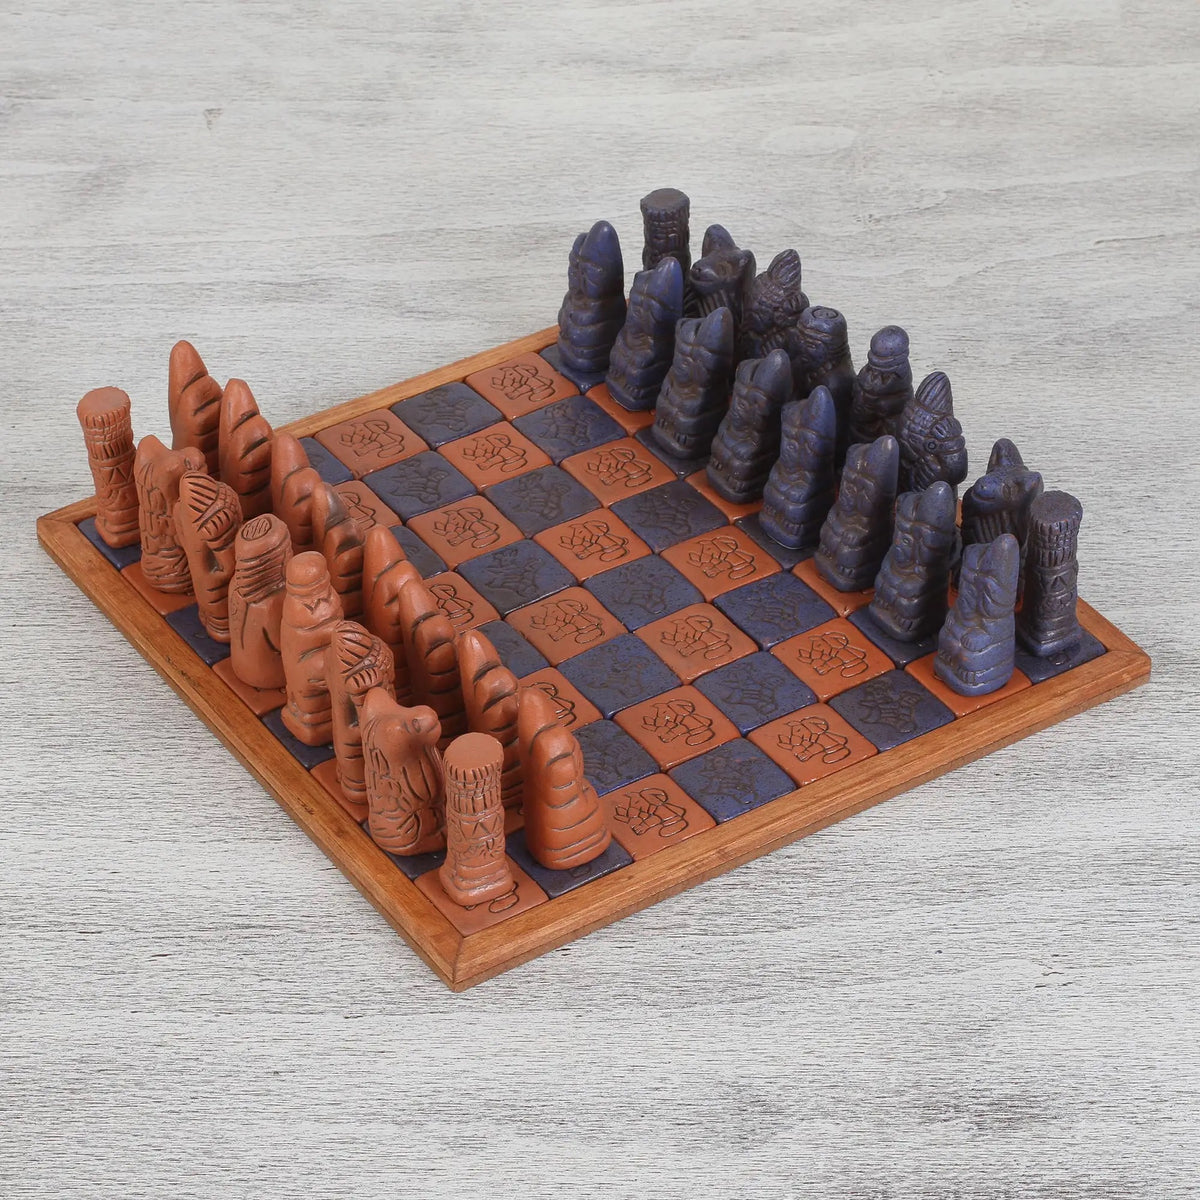 Ceramic and Wood Chess Set in Black and Brown - Hand made in Mexico